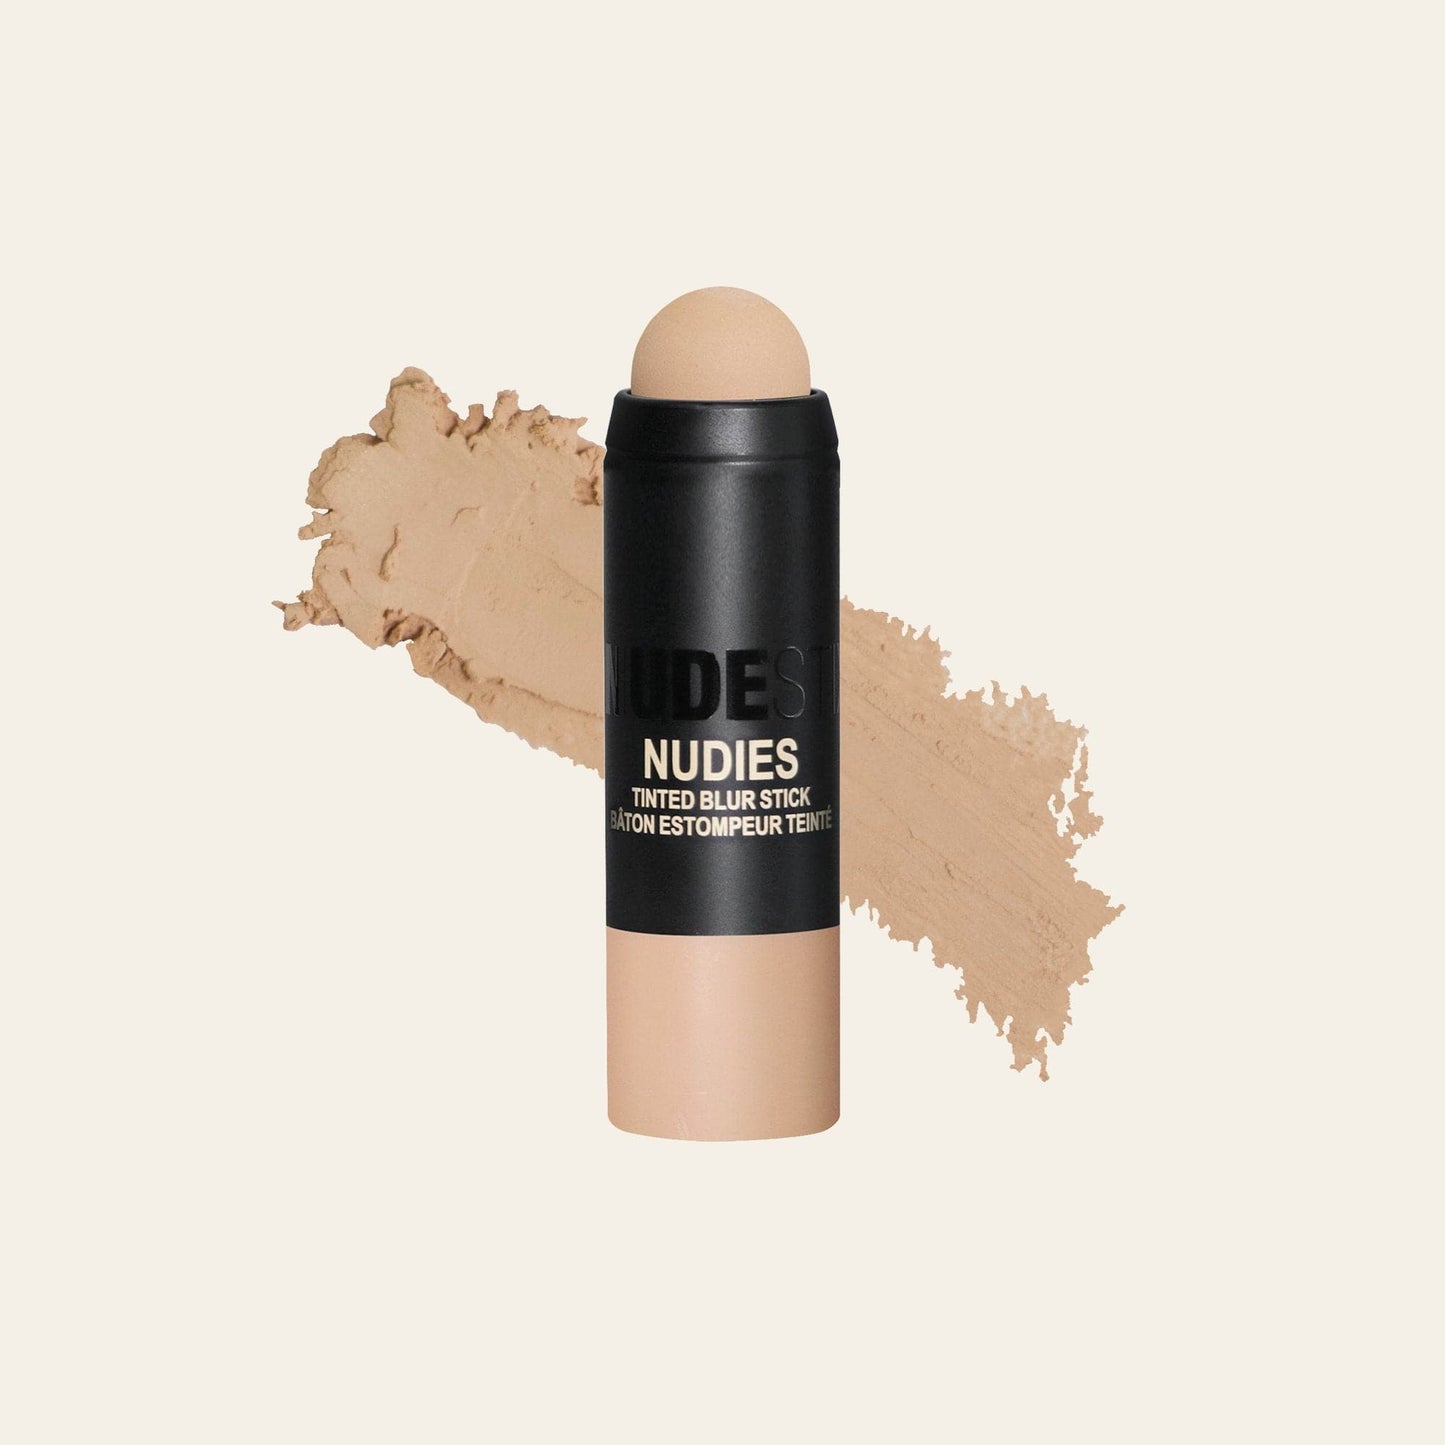 Tinted Blur Foundation Stick in shade Light 2